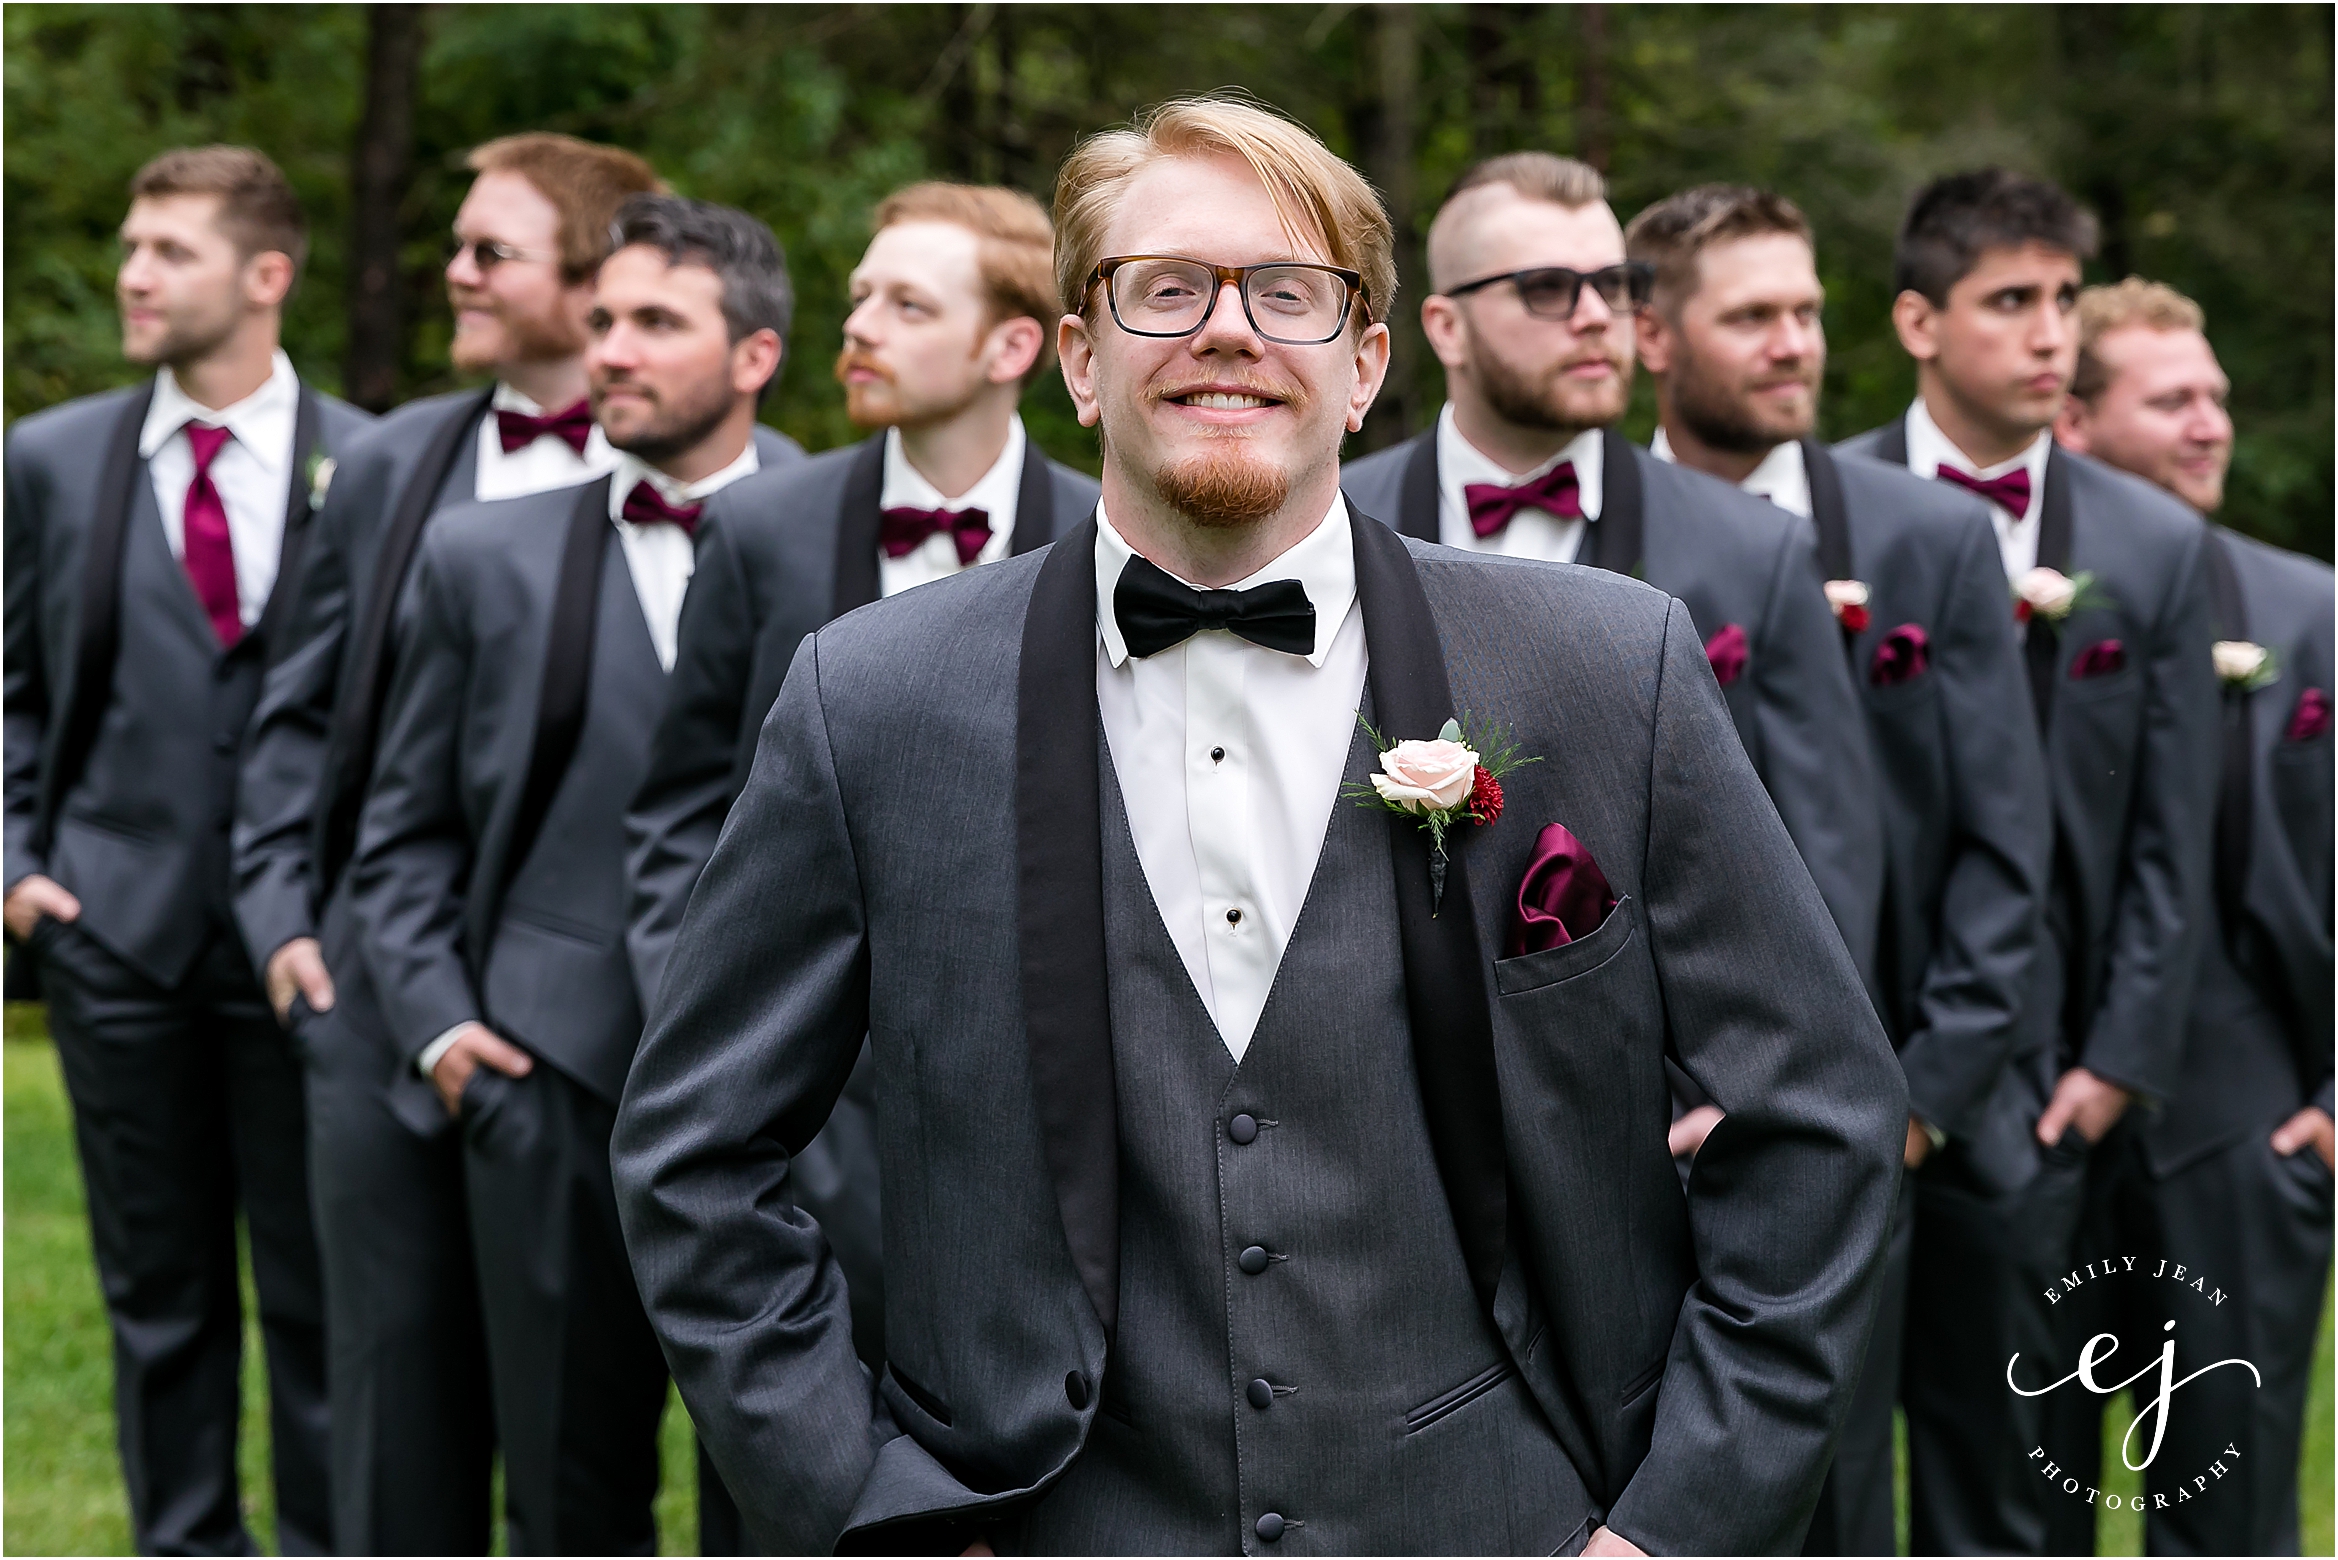 grey tux with black lapel 3 piece suite tuxedo groom with pink boutonniere flying v with groomsmen